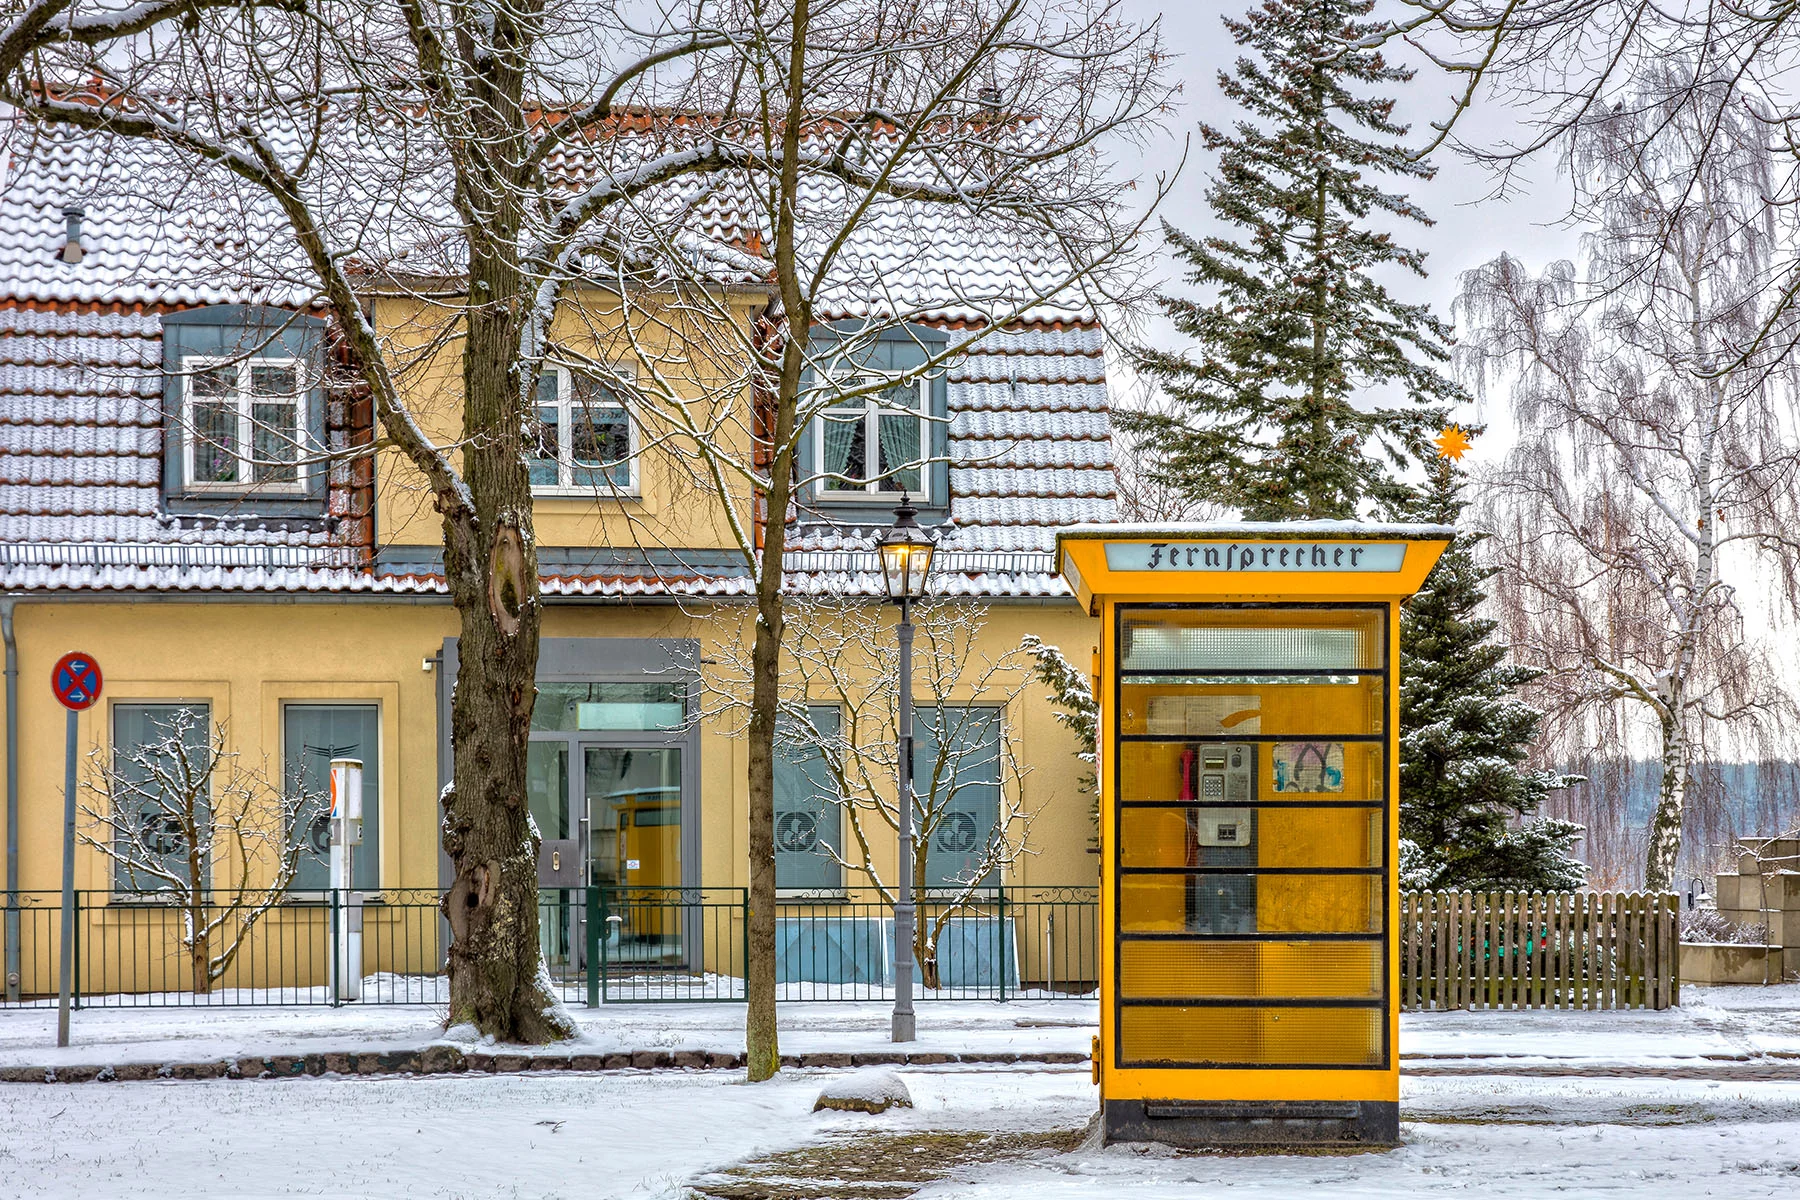 A yellow telephone box in front of a yellow house in the snow in Reinickendorf, Berlin